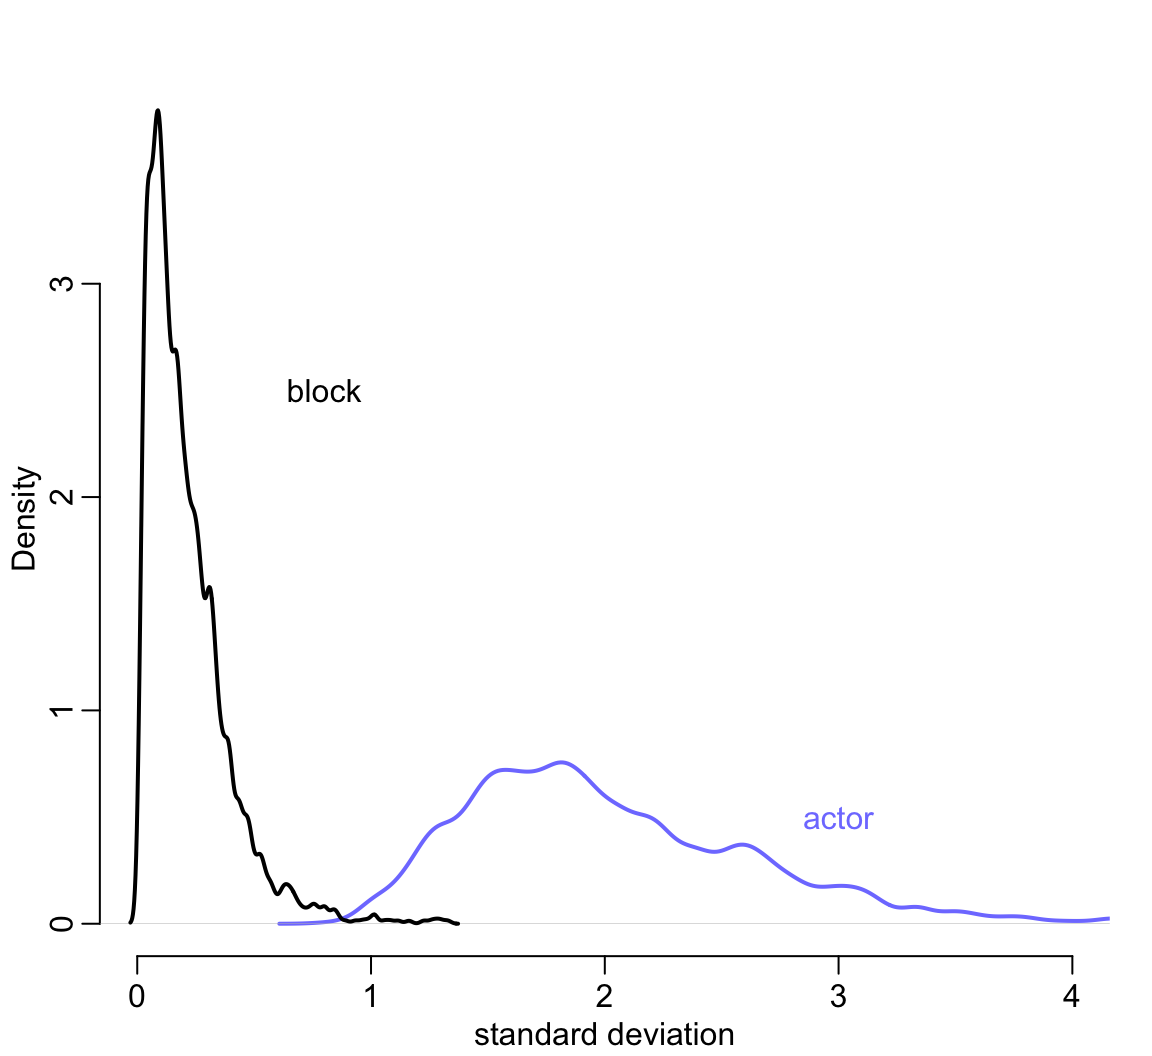 Posterior distributions of the standard deviations of varying intercepts by actor (blue), and block (black).